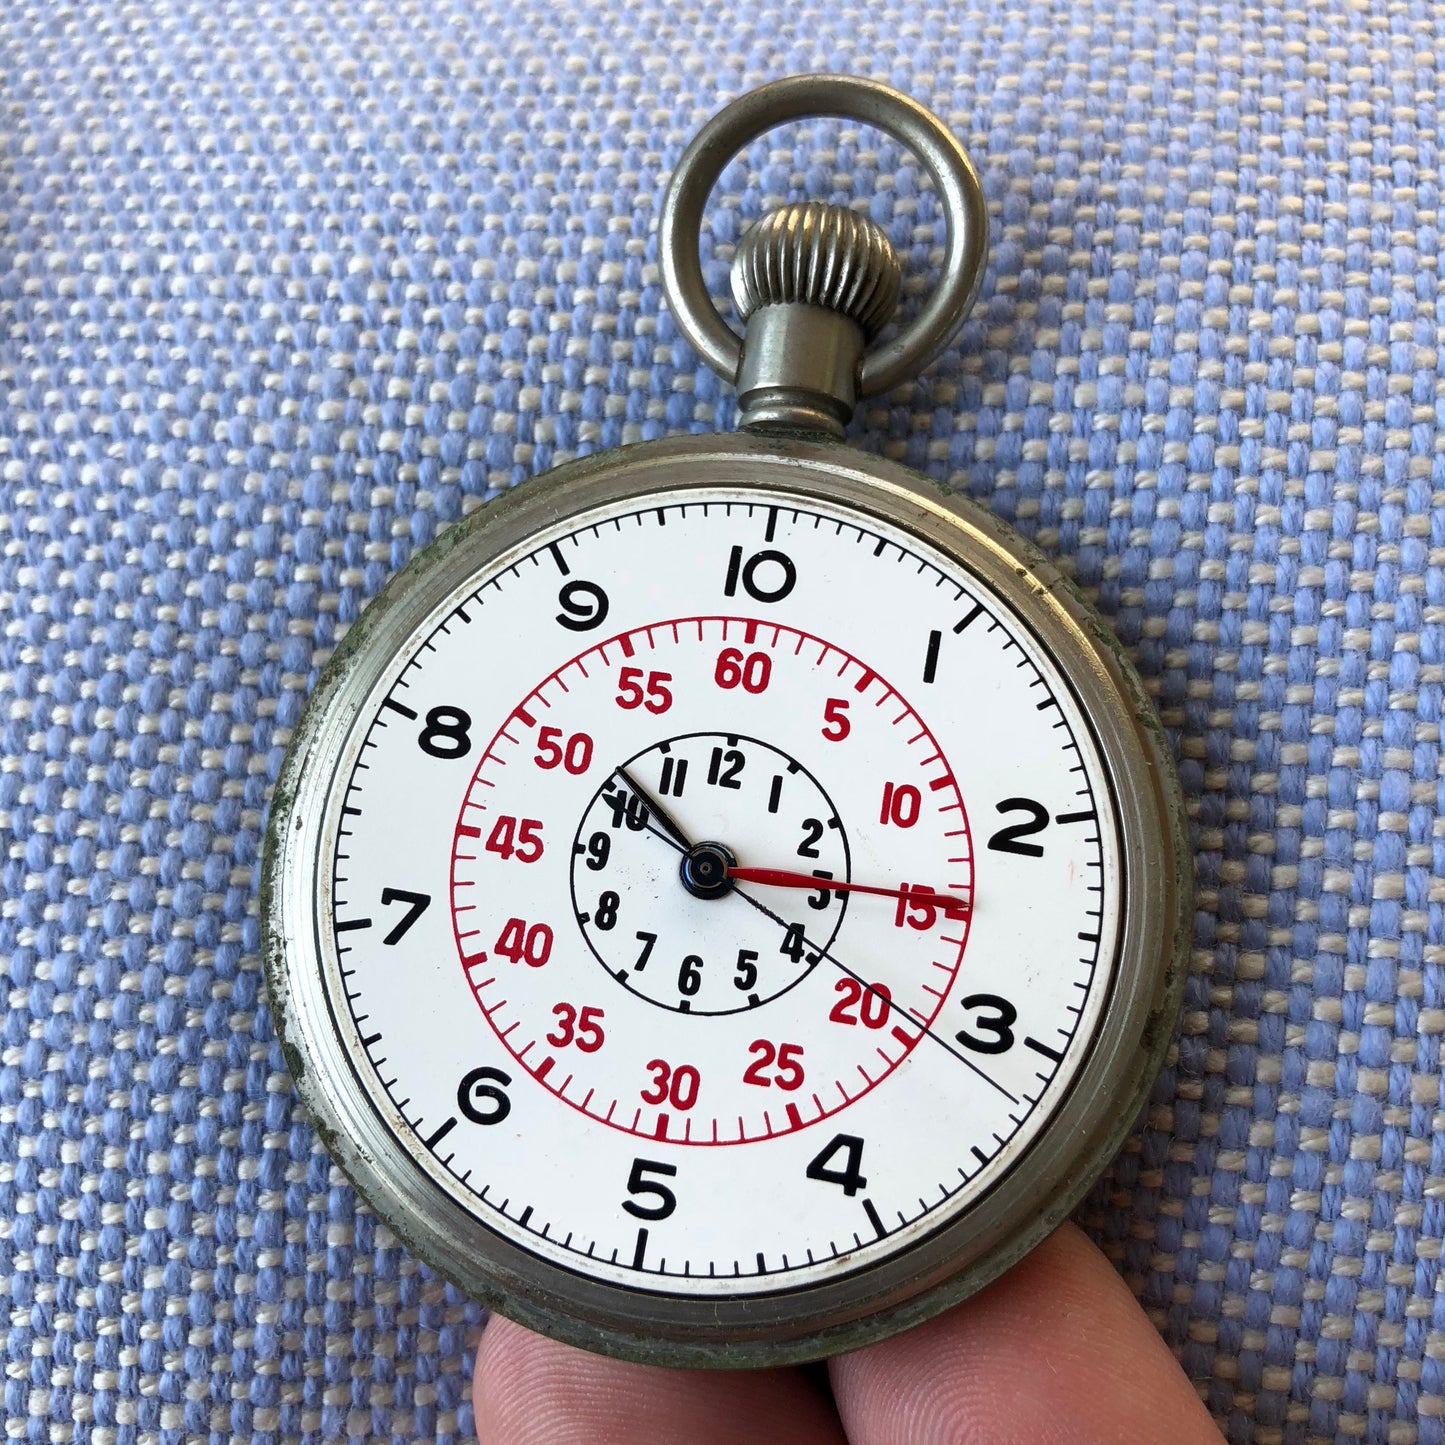 Vintage Zenith Royal Navy Deck H.S.3 WWII Military Pocket Watch - Hashtag Watch Company